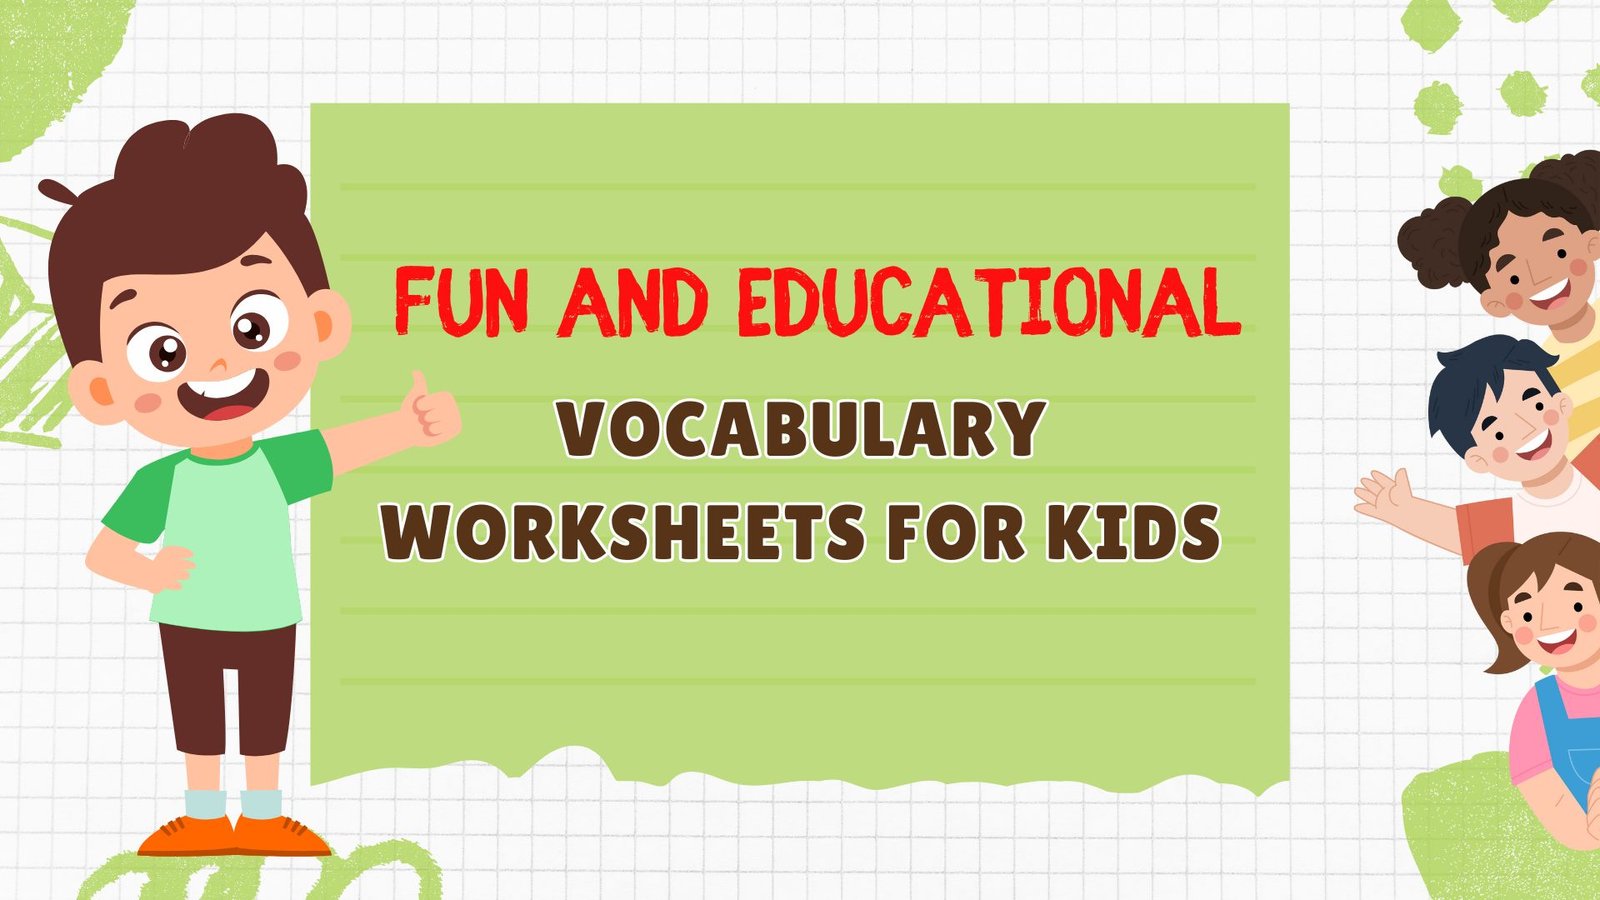 Fun and Educational: Vocabulary Worksheets for Kids